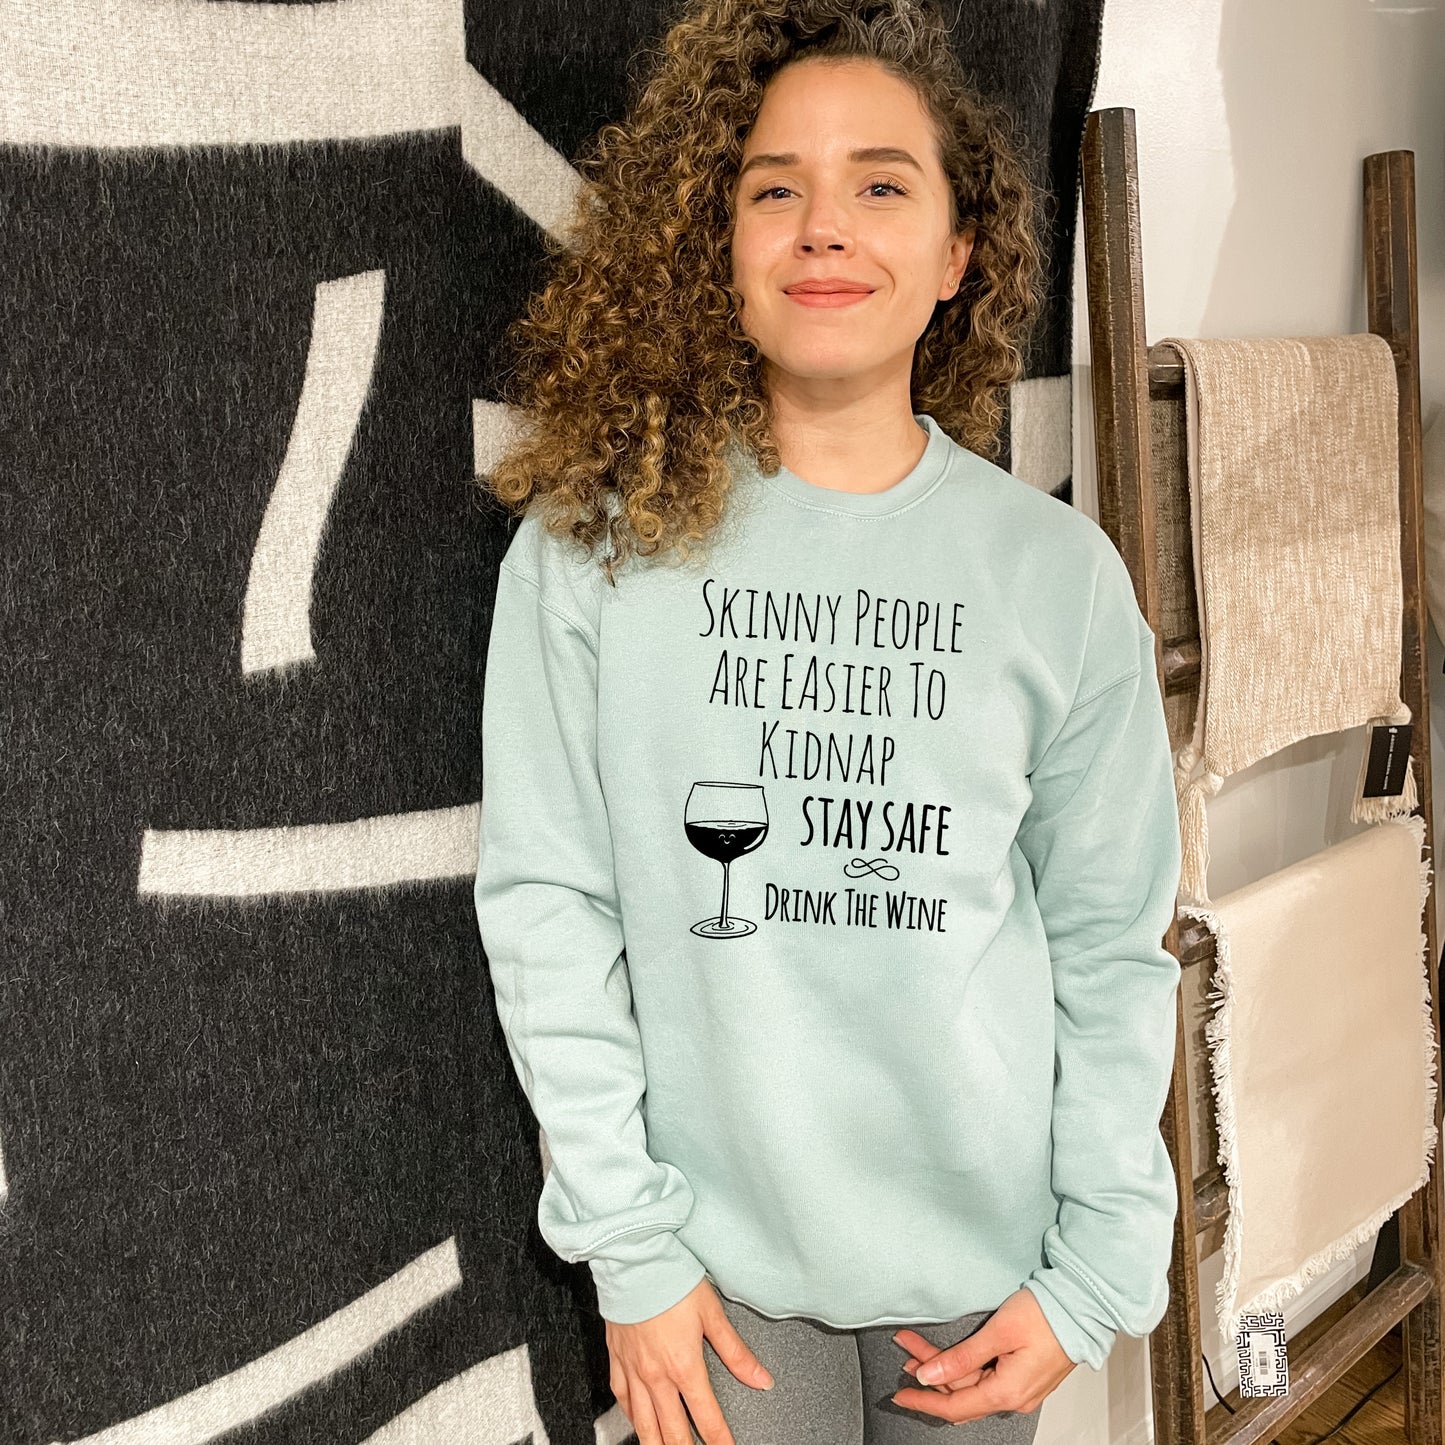 Skinny People Are Easier To Kidnap. Stay Safe. Drink The Wine - Unisex Sweatshirt - Heather Gray or Dusty Blue